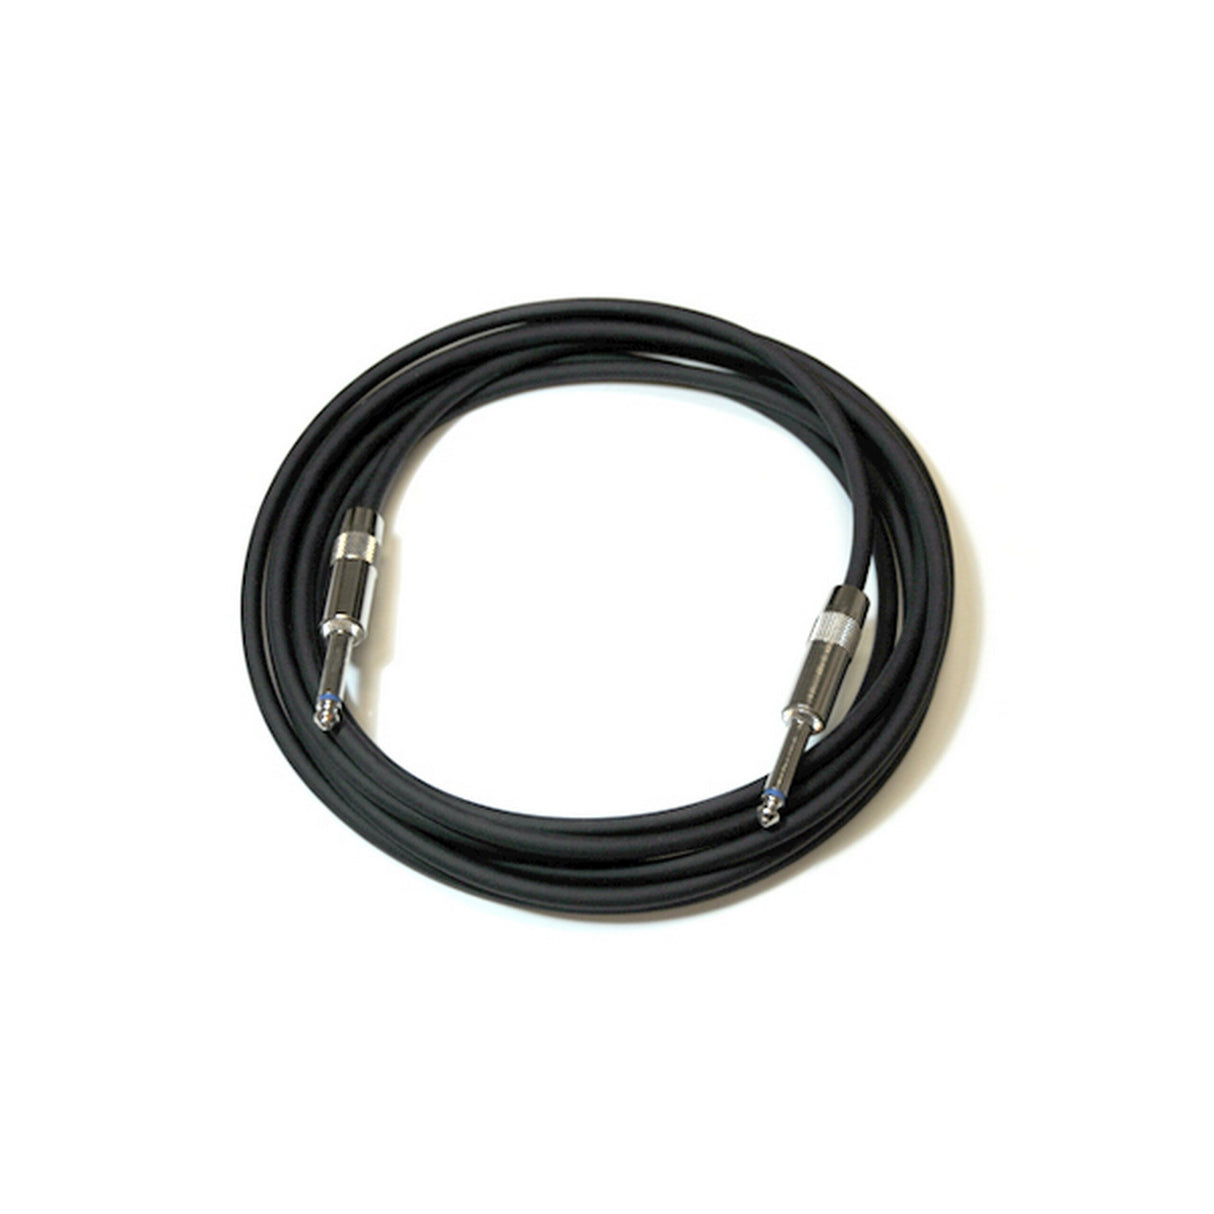 Whirlwind SN10 1/4-Inch Metal Ends Instrument Cable, 10-Feet